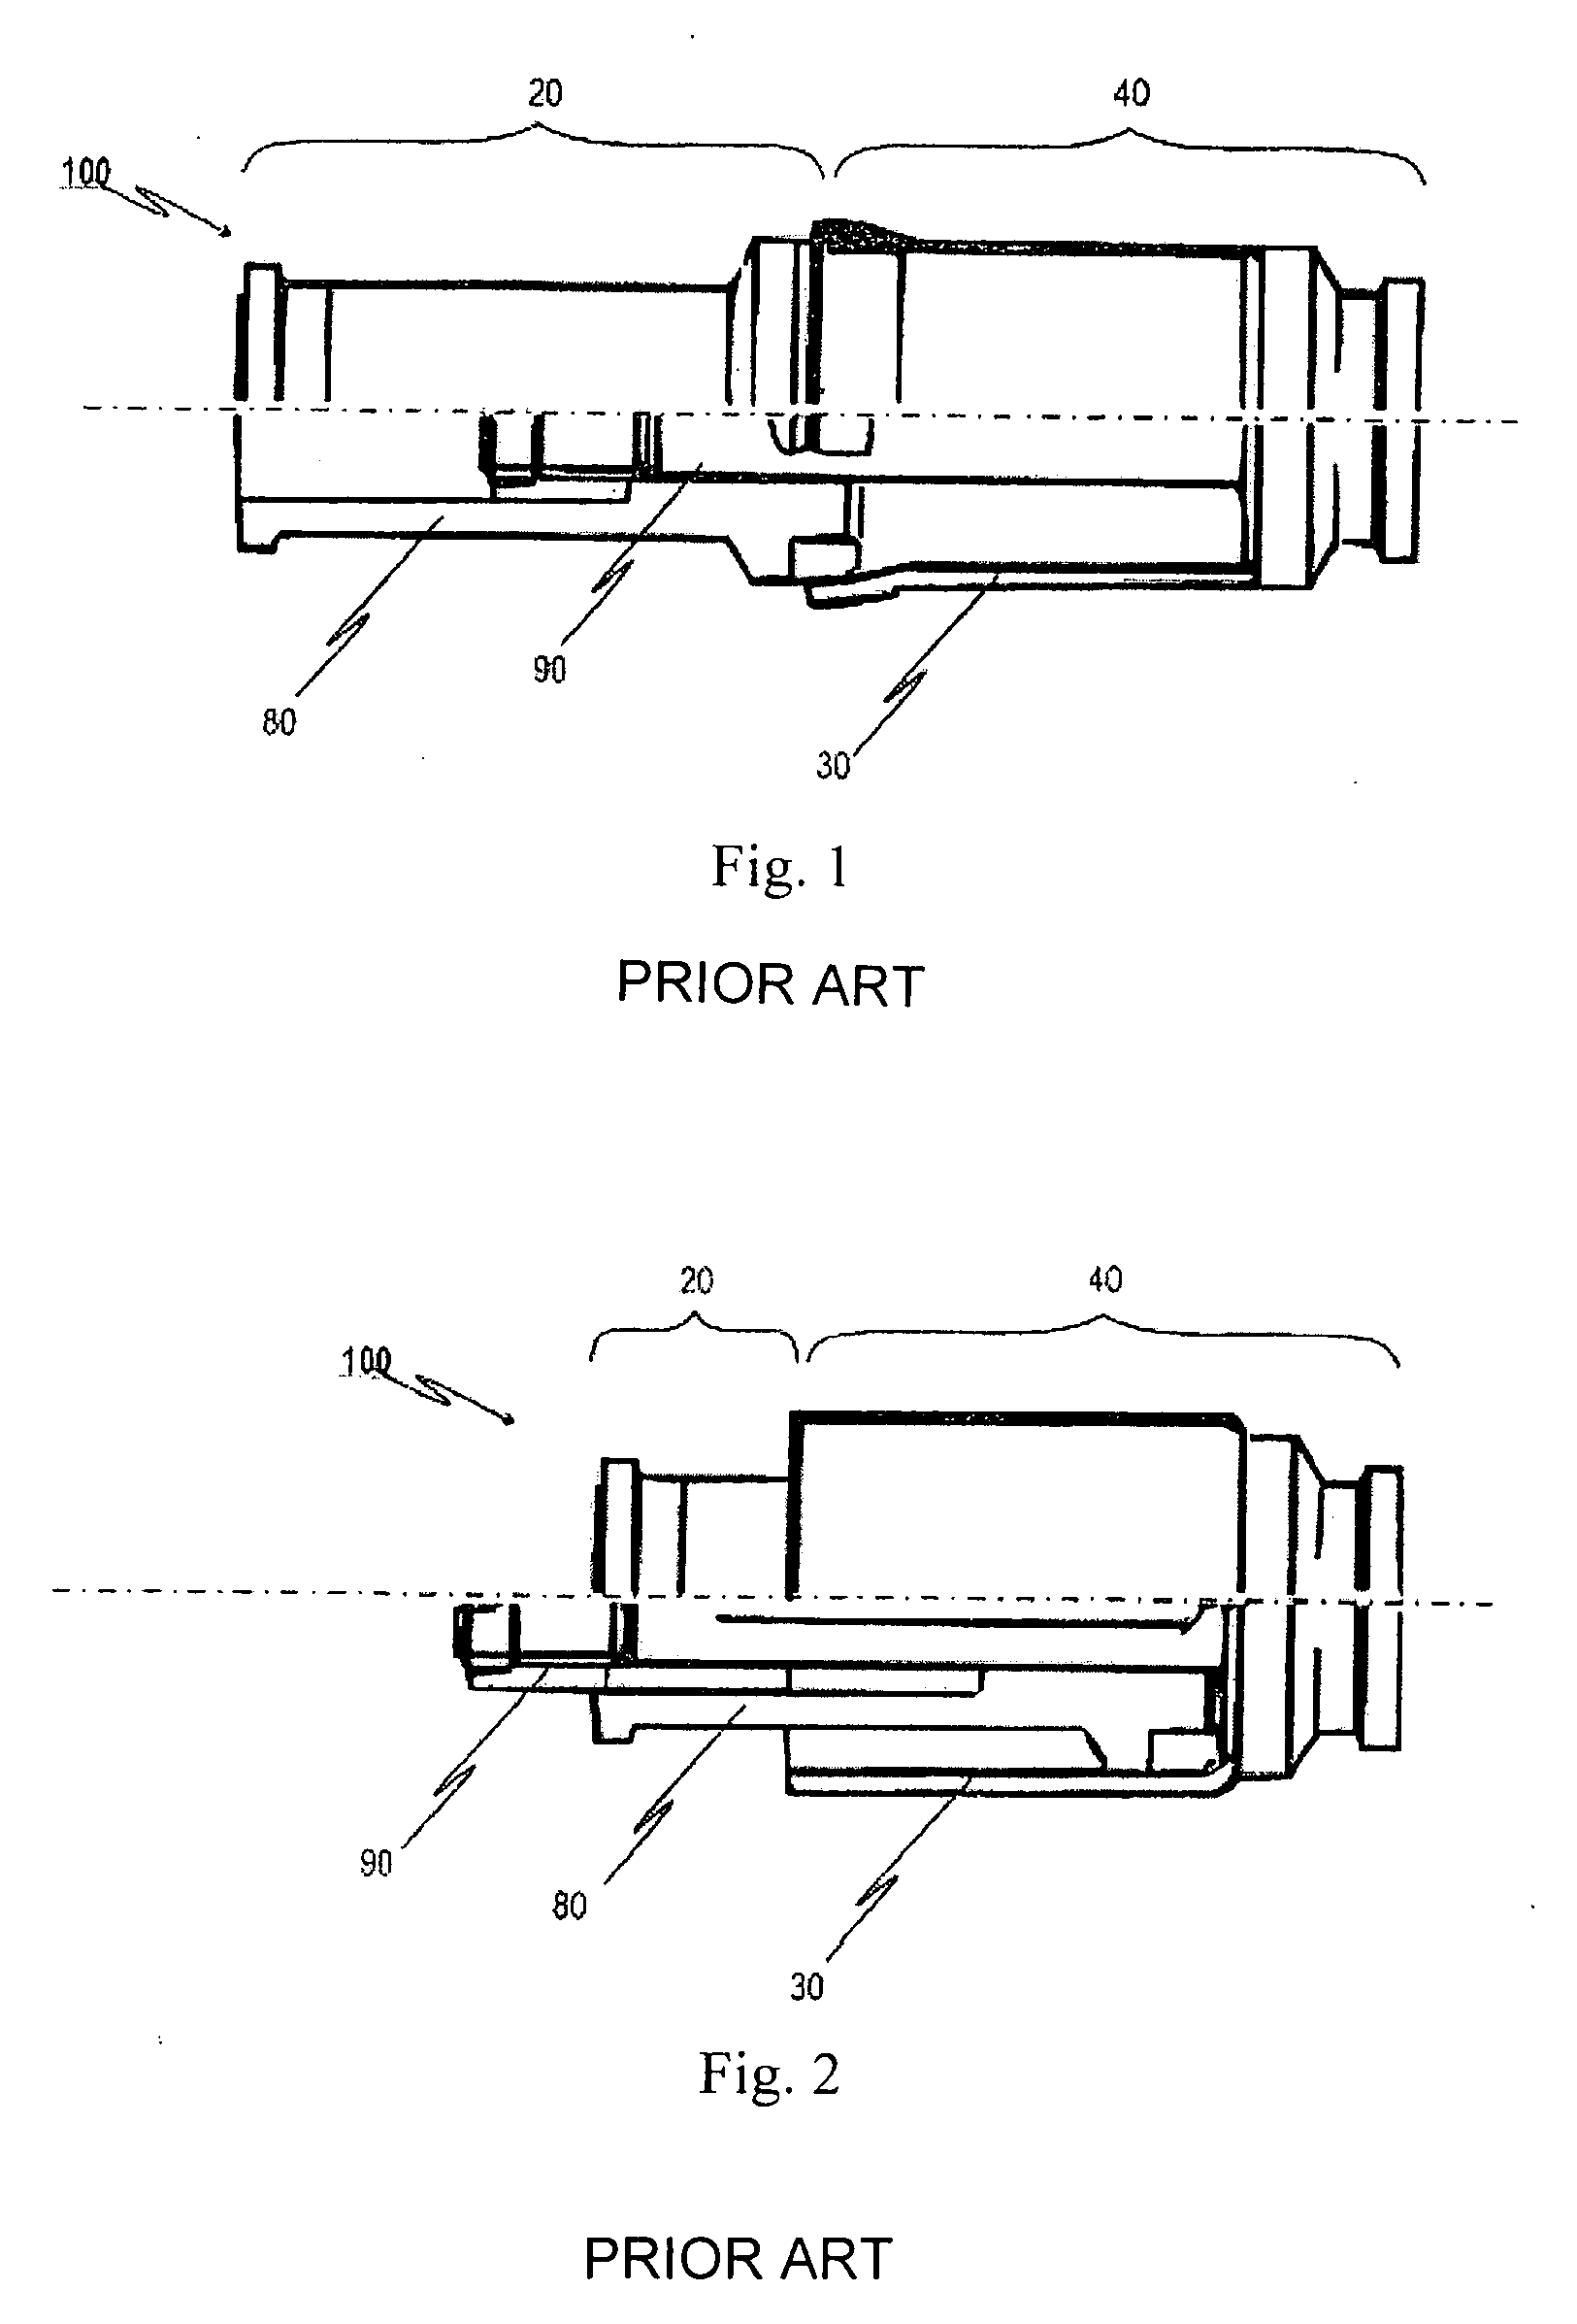 Energy dissipation device with elevated action force